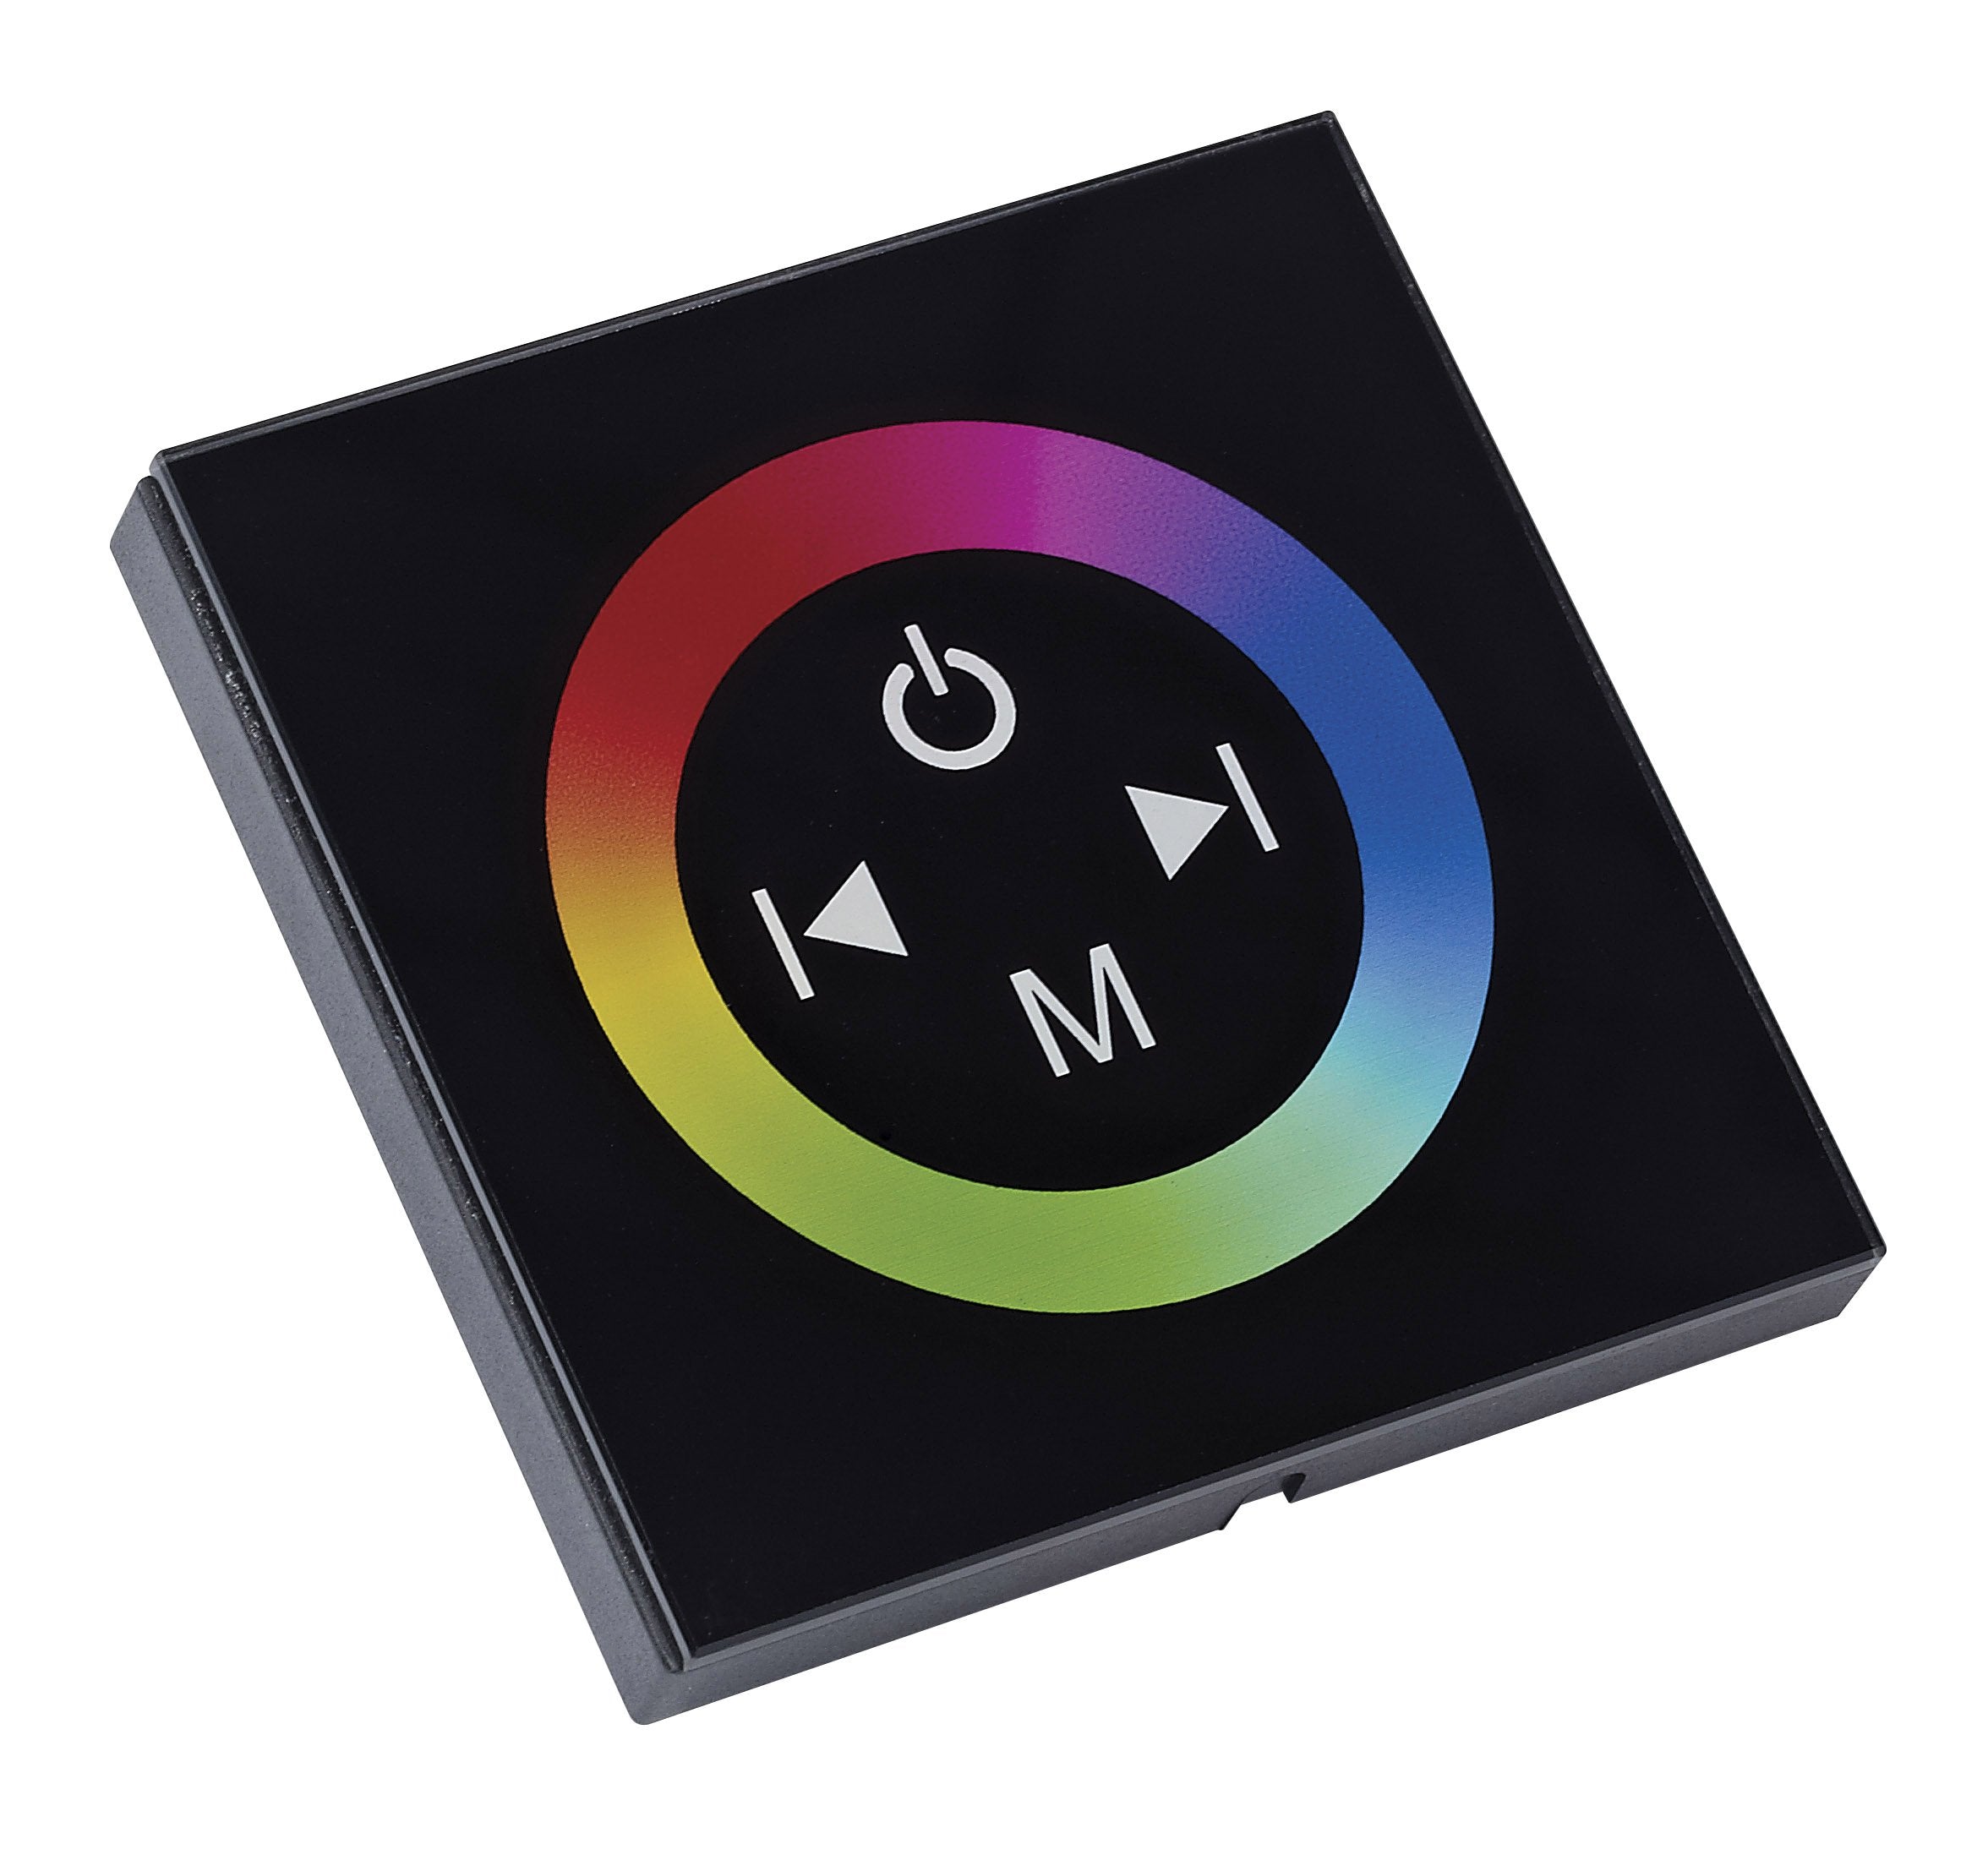 12V/24V TOUCH PANEL RGB WALL CONTROLLER